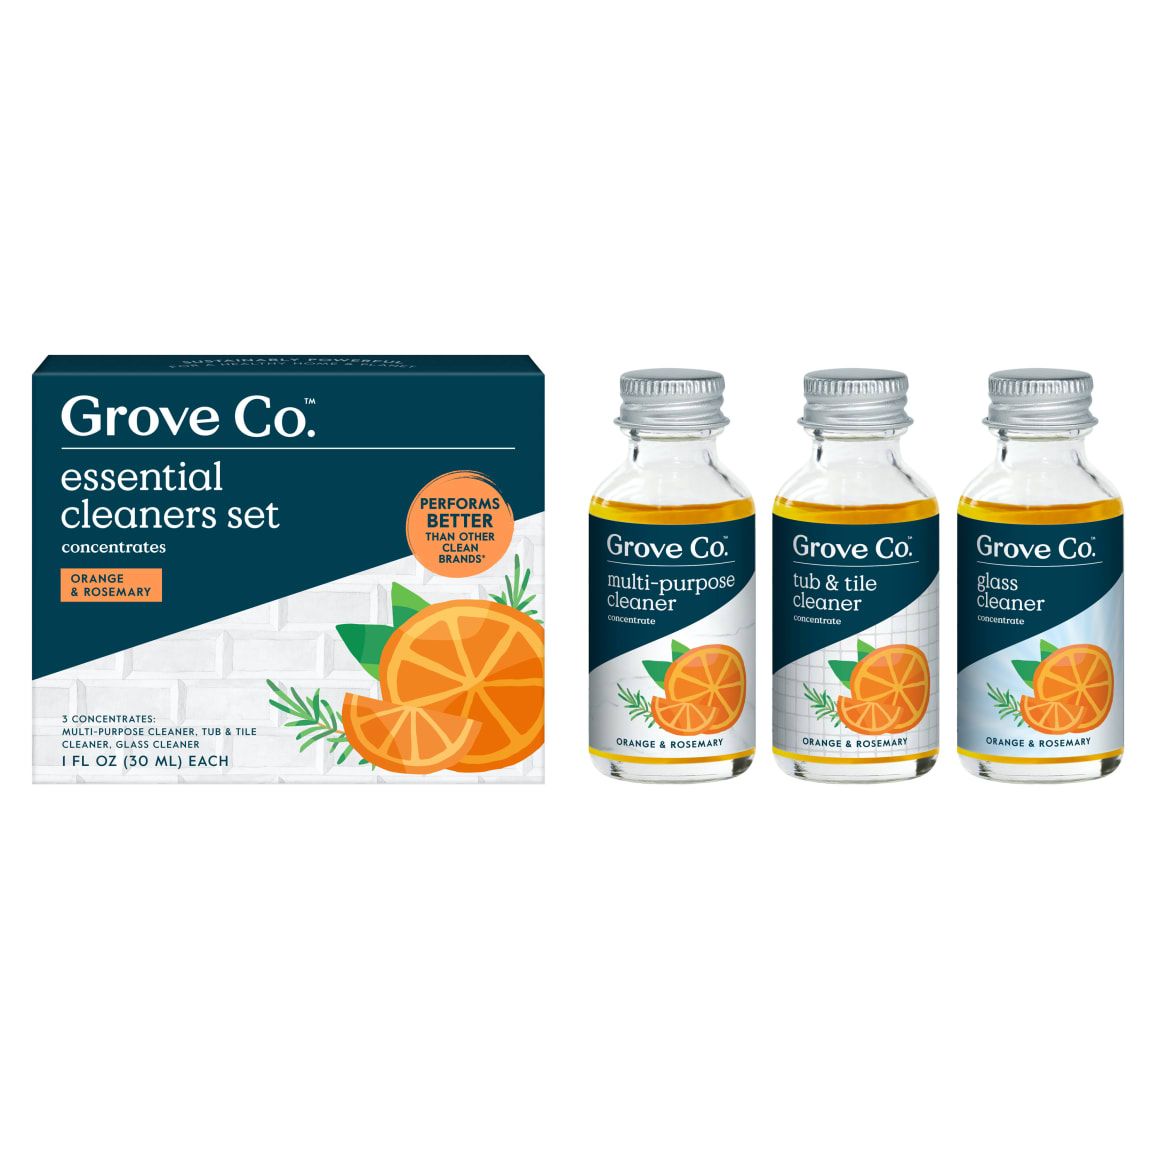 Grove Co. Essential Cleaner Concentrates Set | Grove